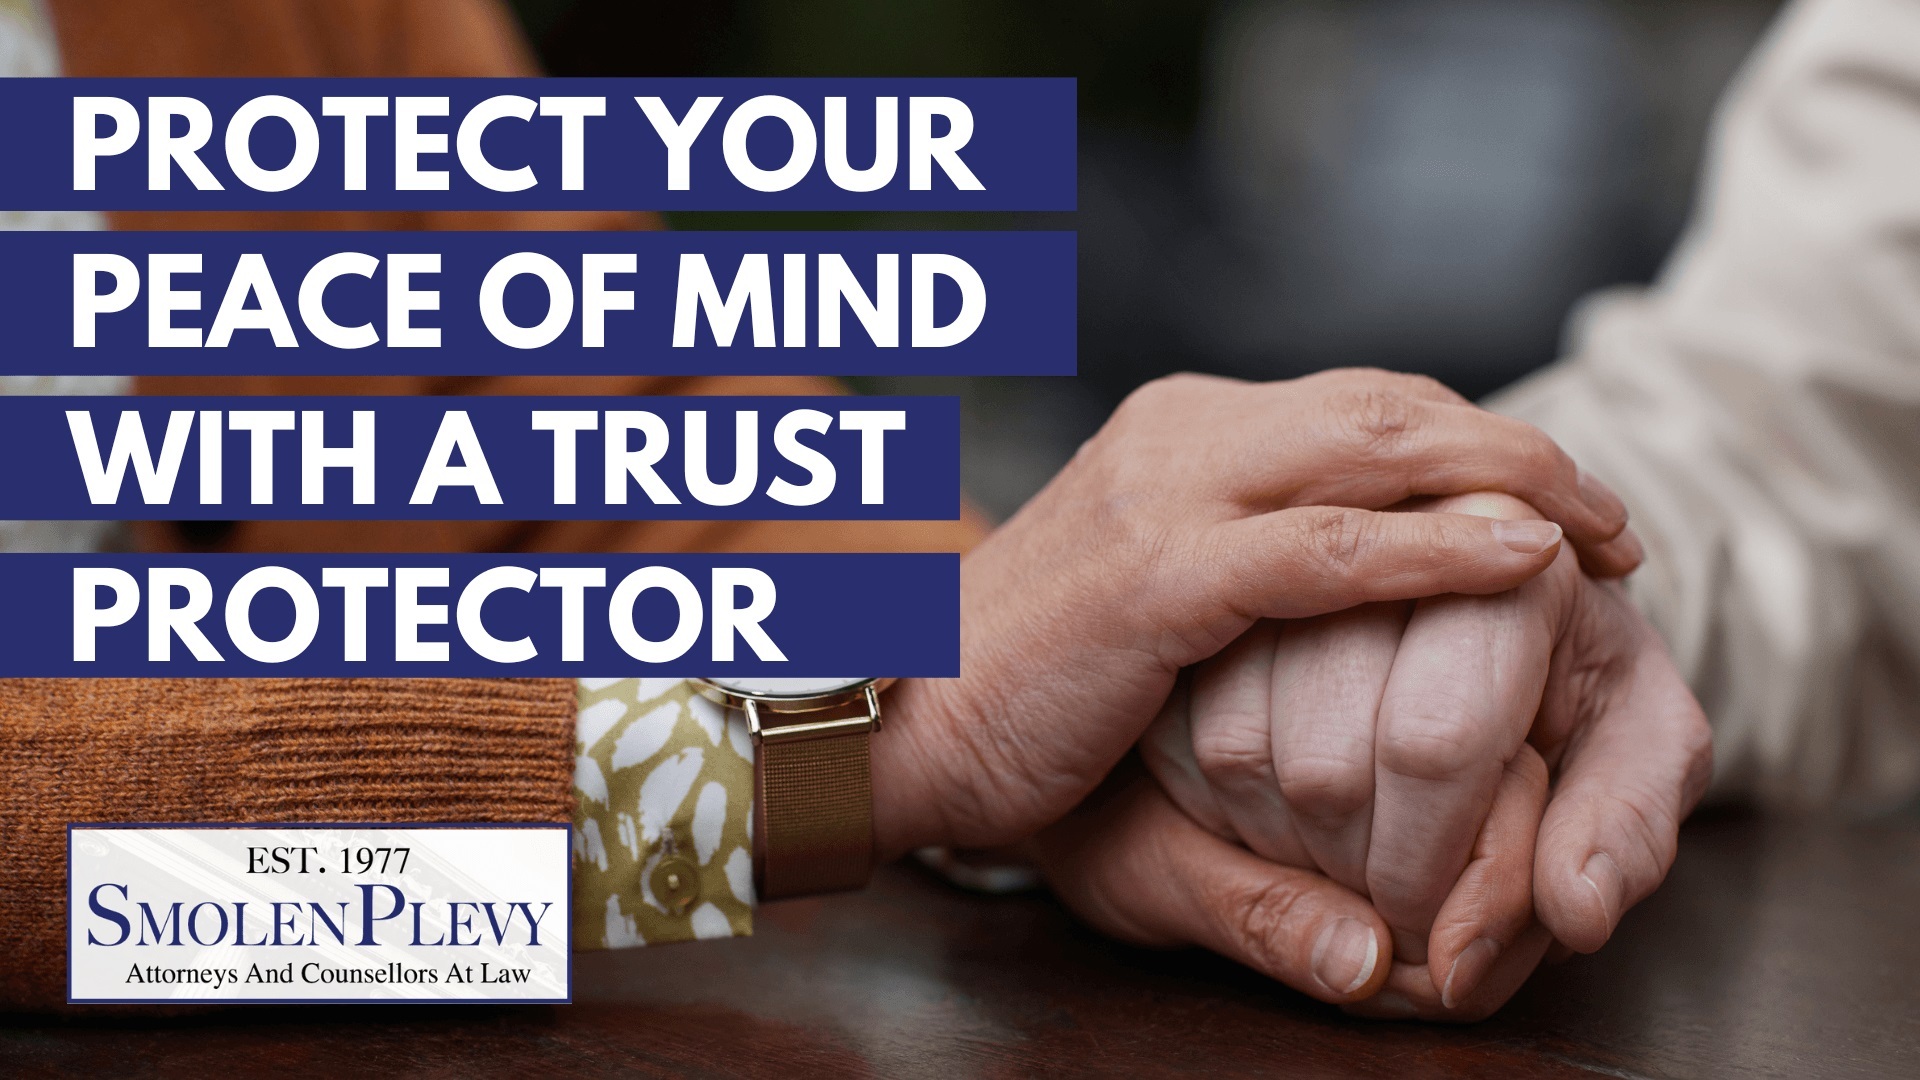 Protect Your Peace of Mind with a Trust Protector